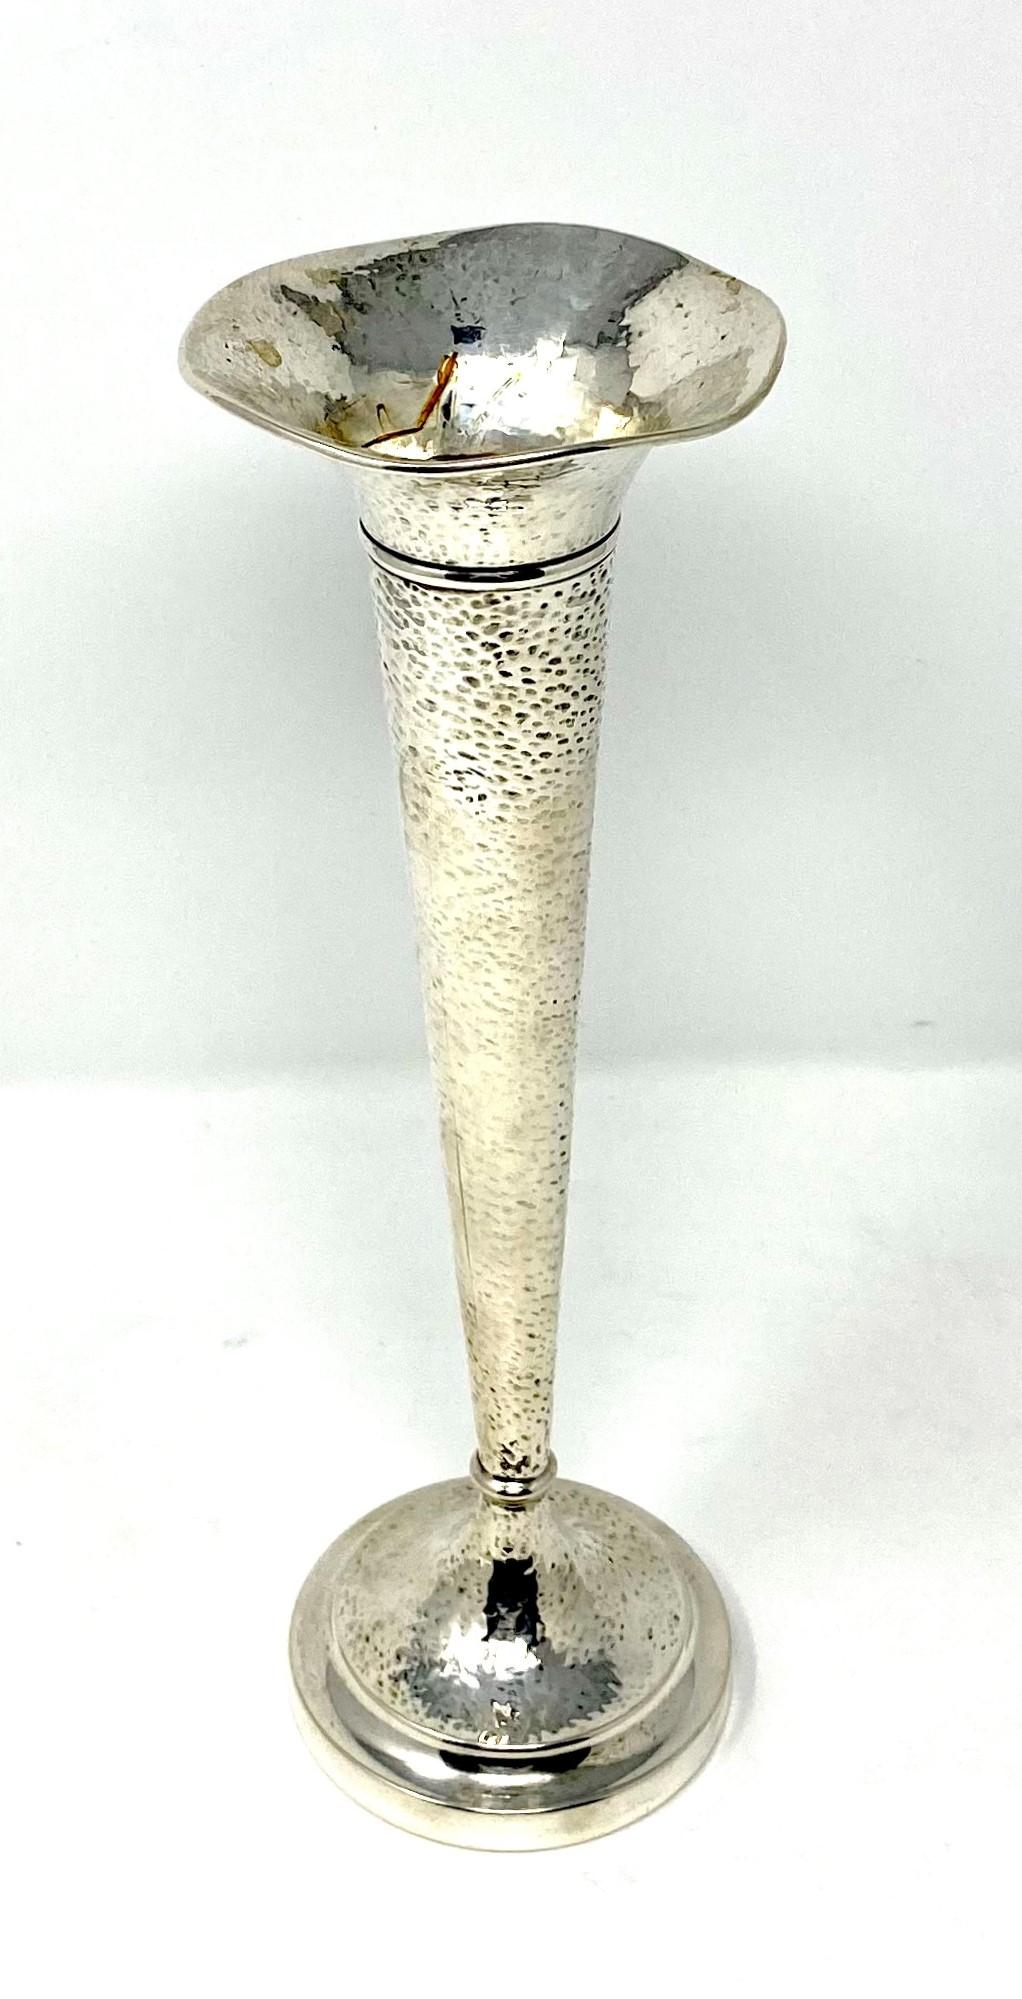 Antique American hammered sterling silver trumpet bud vase, circa 1890's.